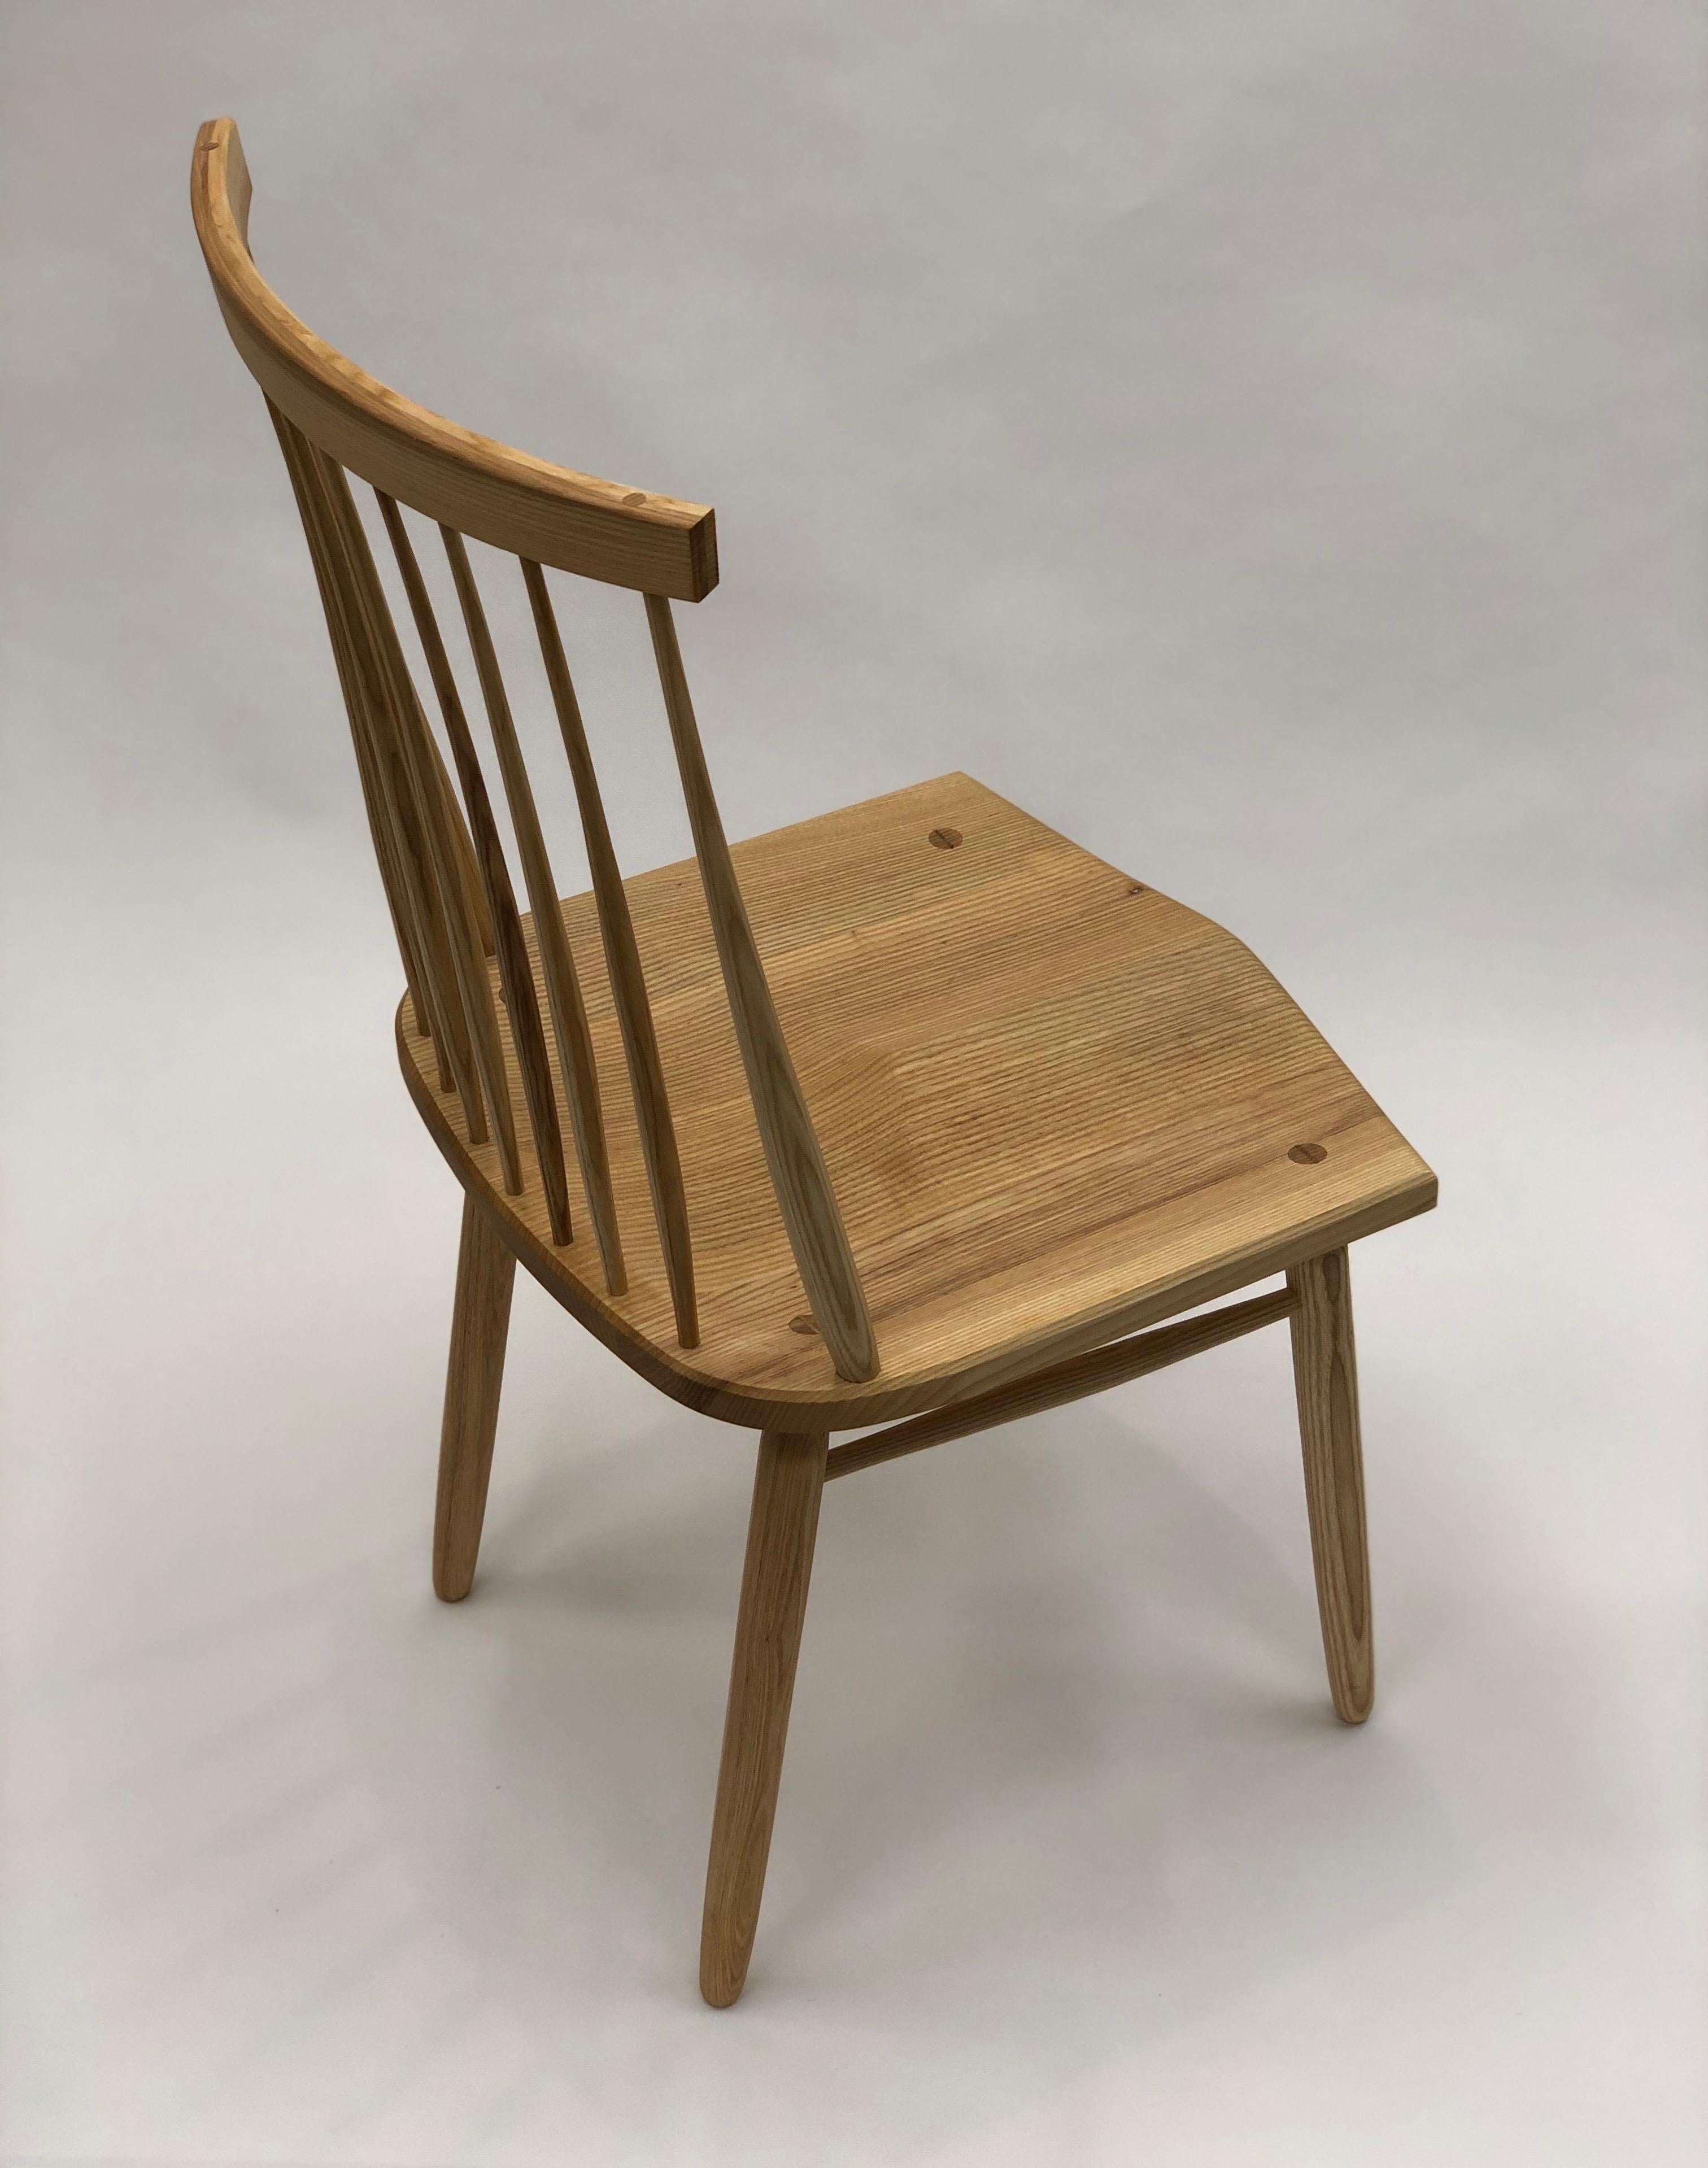 In designing this chair I wanted to best utilize the best and most practical aspects of the classical Windsor chair and apply them in contemporary proportion. The genius of the classical Windsor is in its efficient construction, every part is